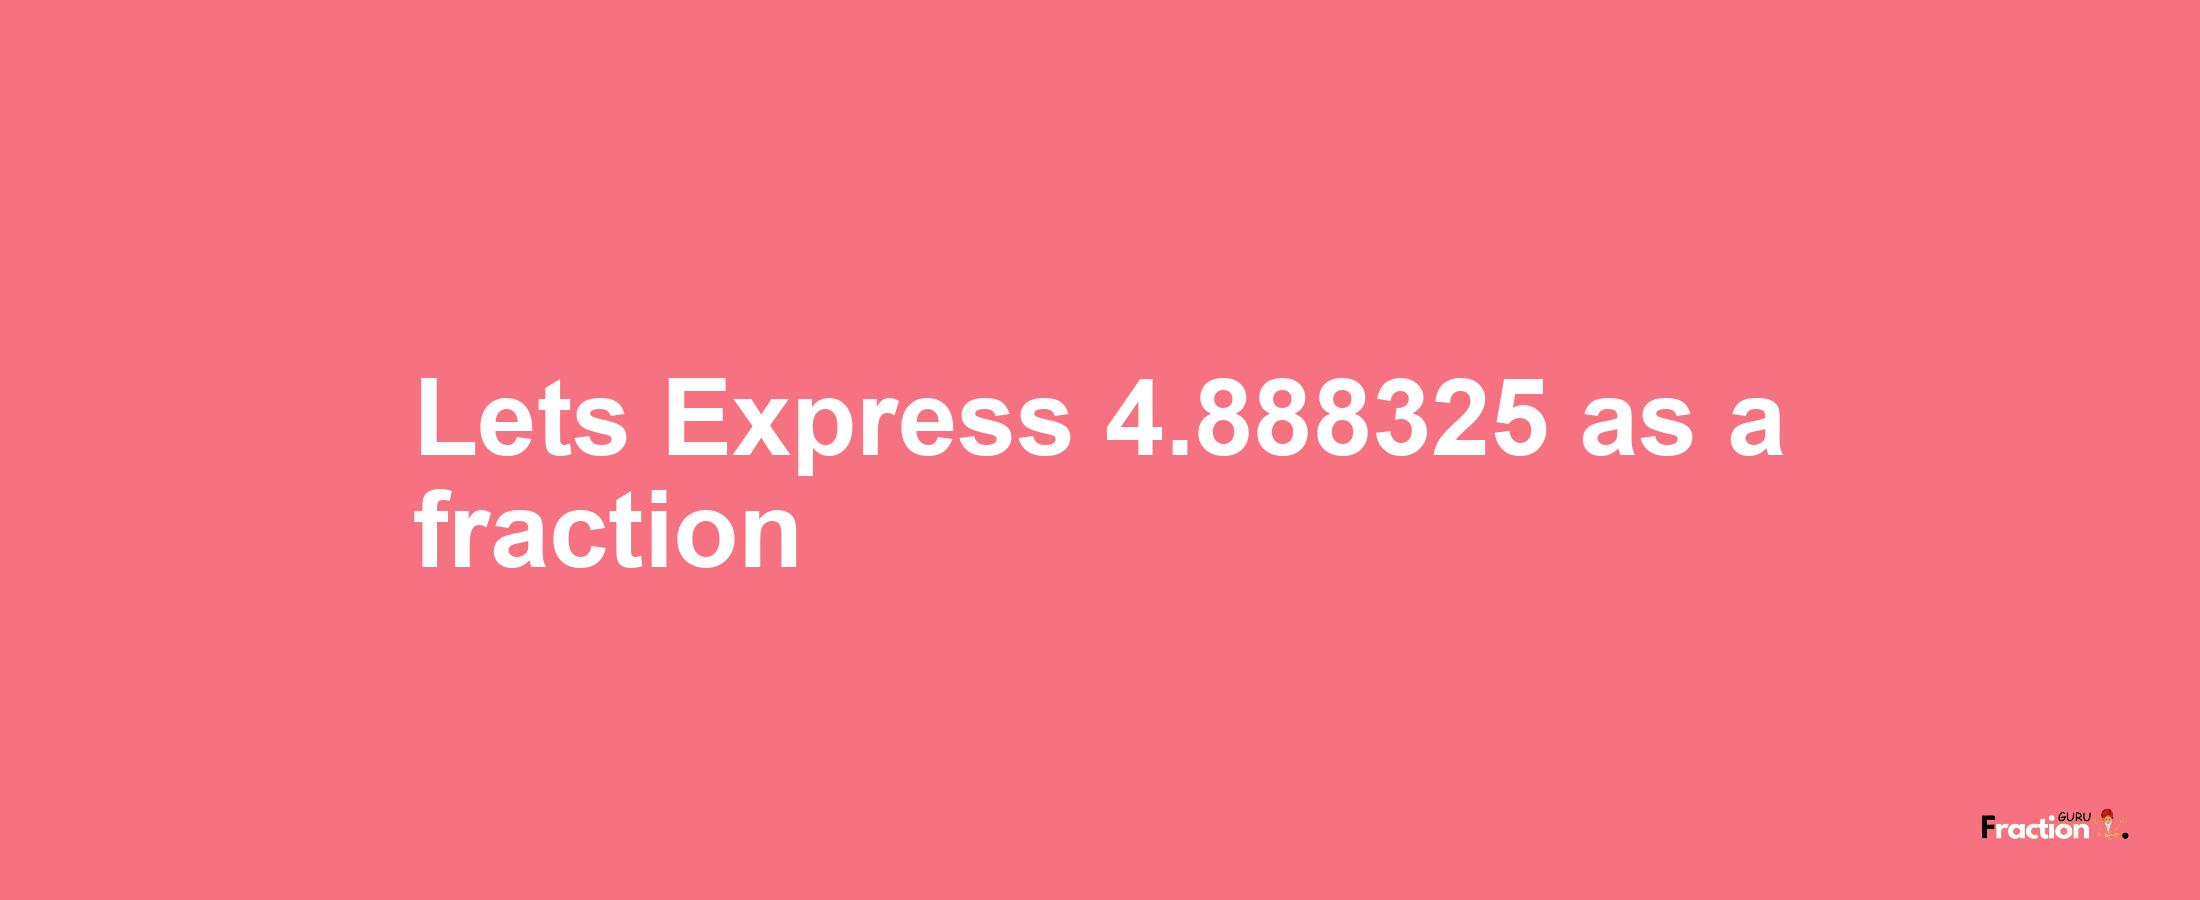 Lets Express 4.888325 as afraction